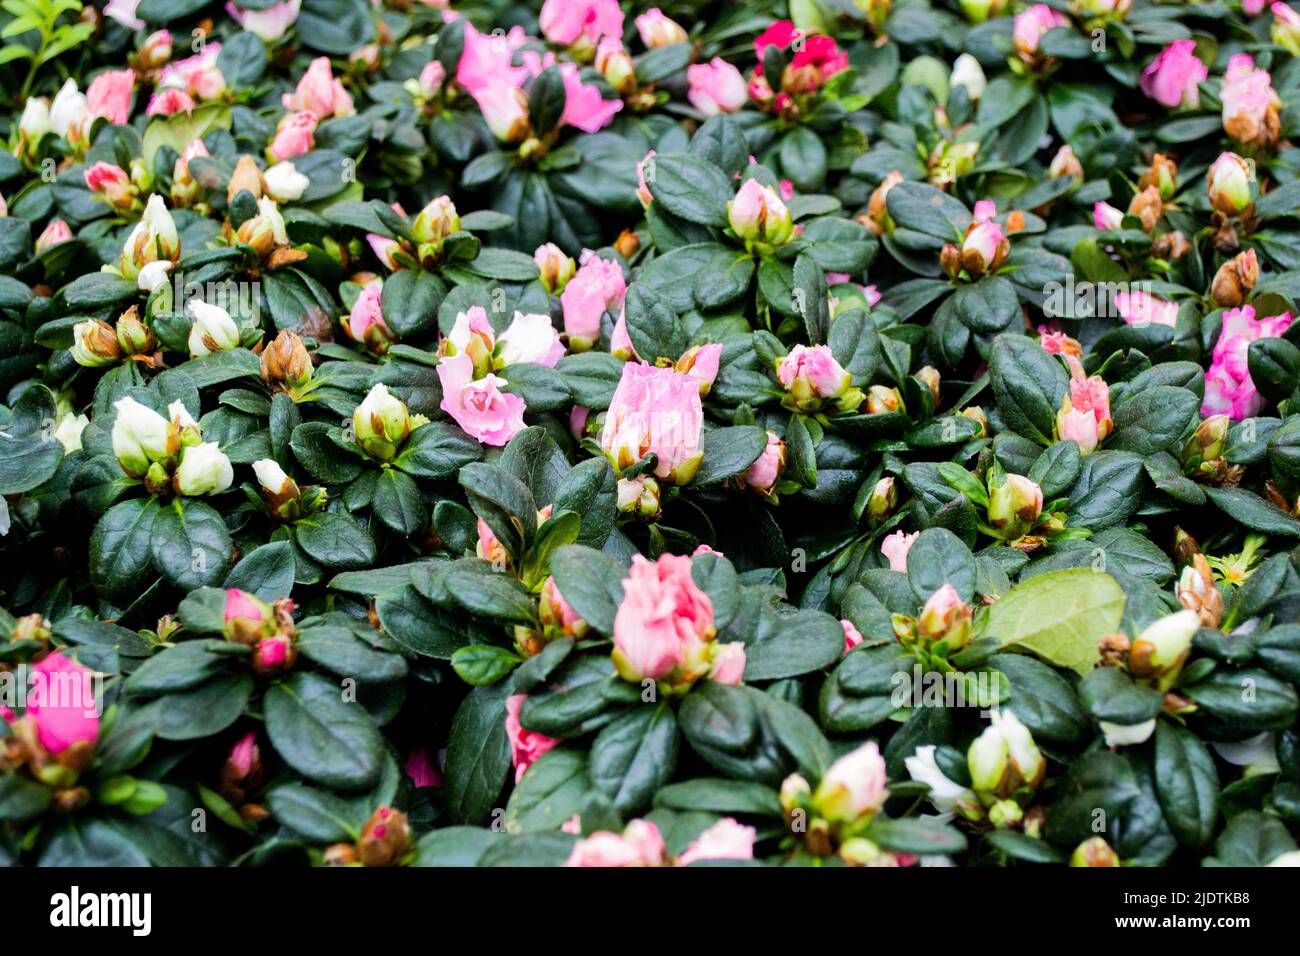 Beautiful natural floral background. Pink flowers and buds of azalea - the species Rhododendron simsii with dark green leaves. Copy space. Stock Photo